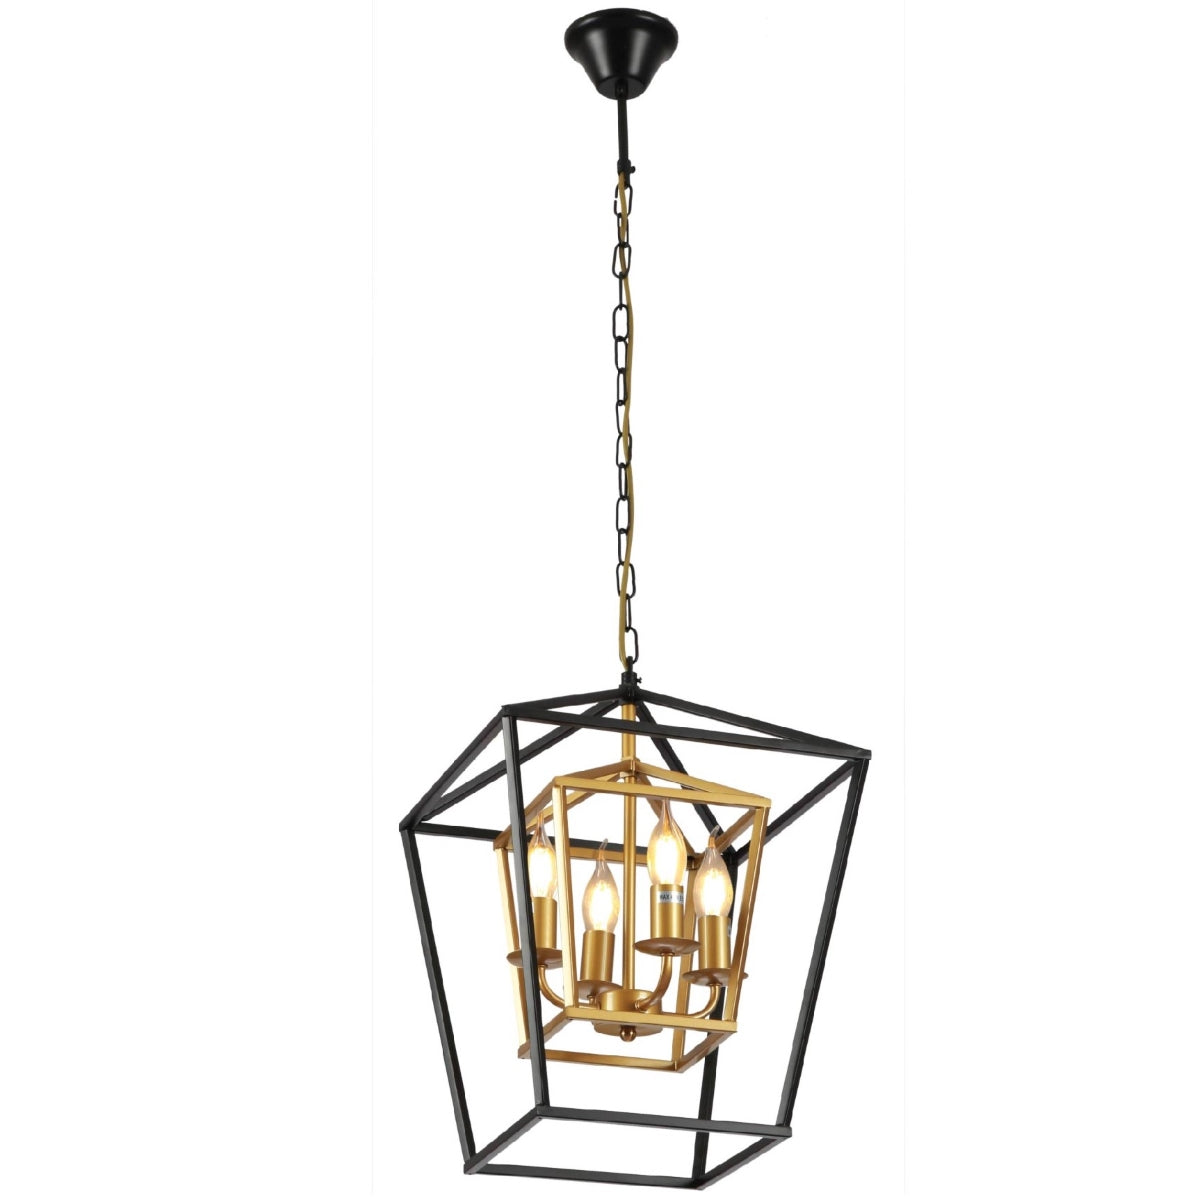 Main image of Black and Gold Candle Farmhouse Vintage Pendant Ceiling Light with 4xE27 Fitting | TEKLED 159-17450